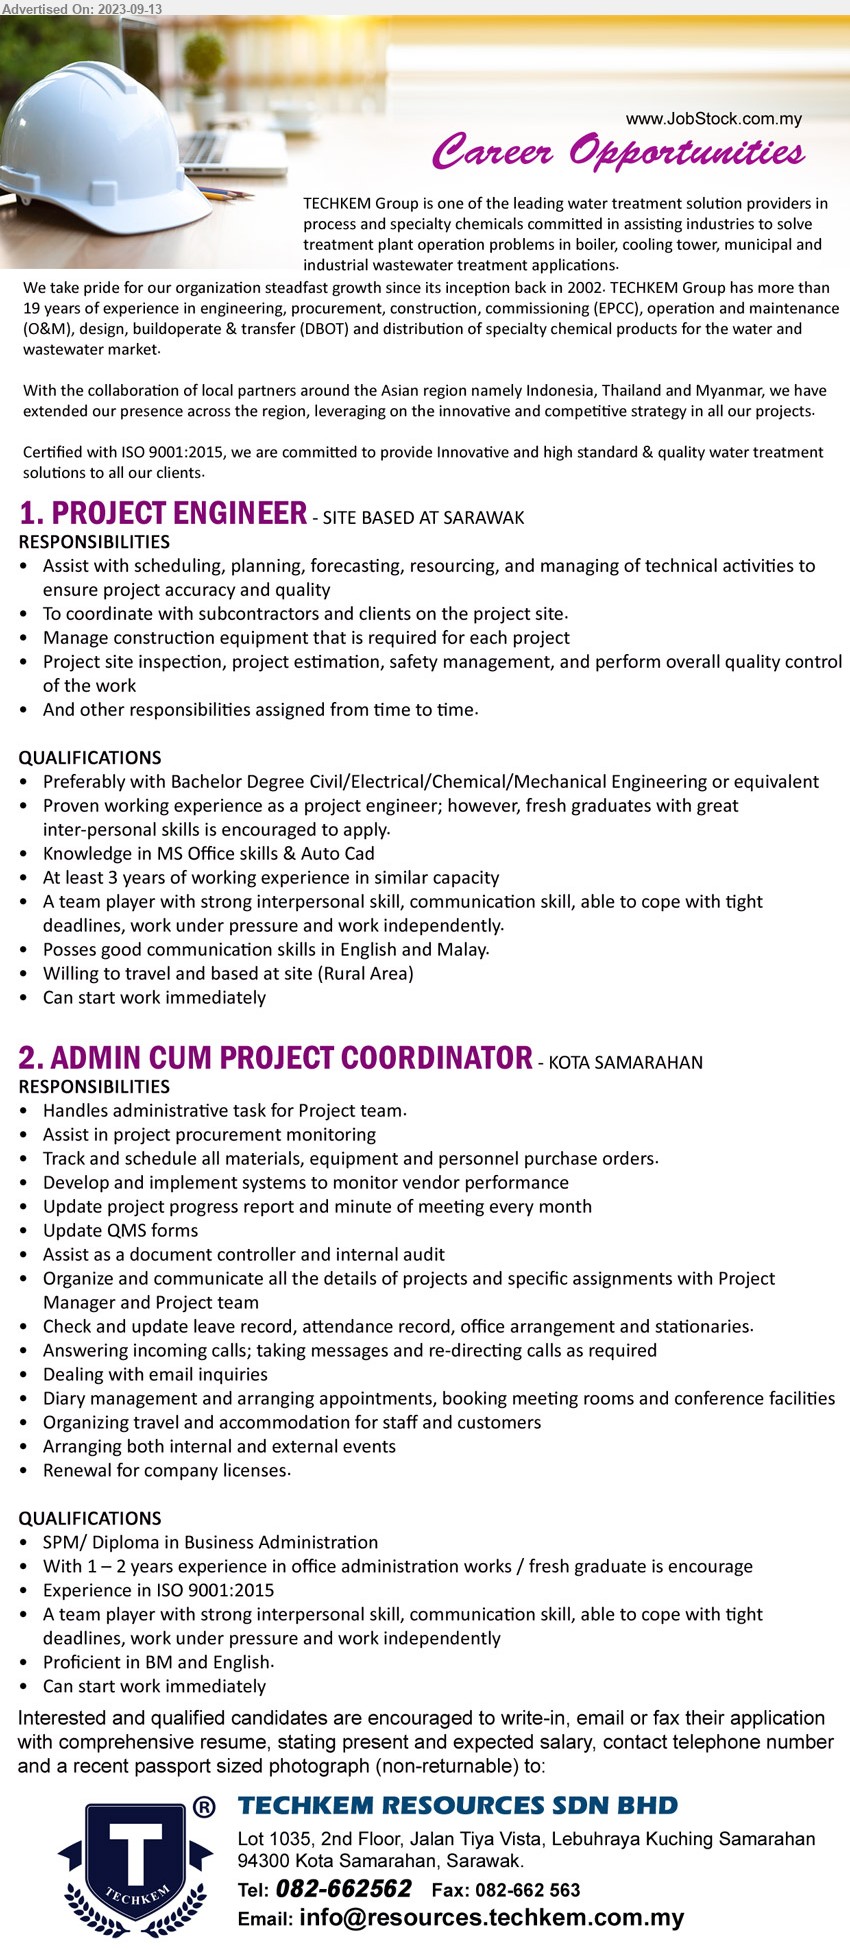 TECHKEM RESOURCES SDN BHD - 1. PROJECT ENGINEER (Sarawak), Bachelor Degree Civil/Electrical/Chemical/Mechanical Engineering, Knowledge in MS Office skills & Auto Cad,...
2. ADMIN CUM PROJECT COORDINATOR (Kuching), SPM/ Diploma in Business Administration, Experience in ISO 9001:2015,...
Email resume to ...
